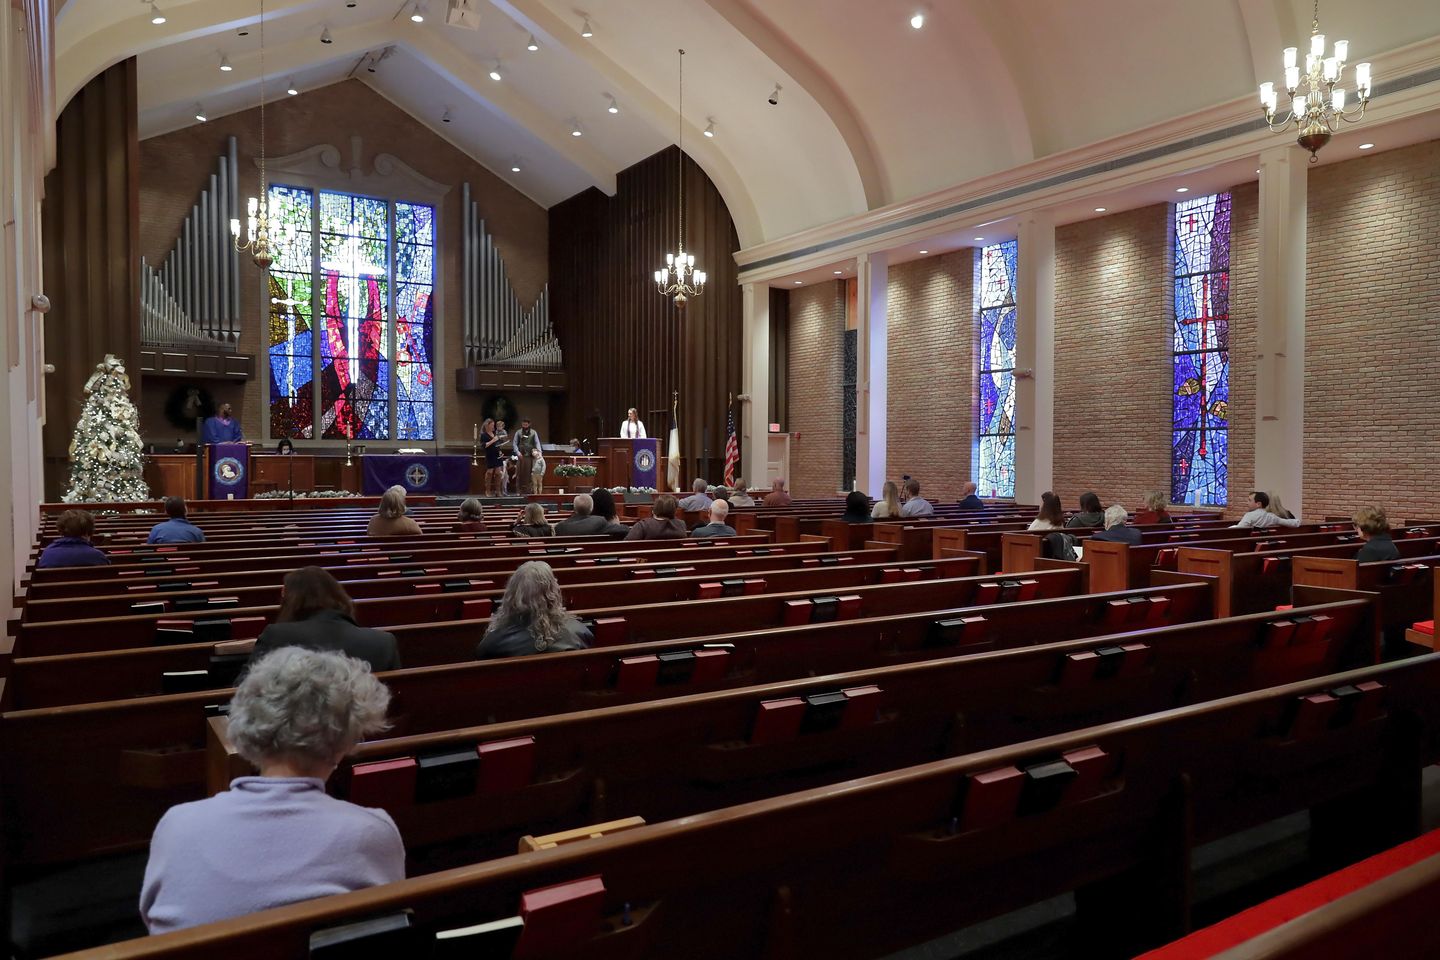 Losing their religion: Gallup poll shows 81% of Americans believe in God, a new low